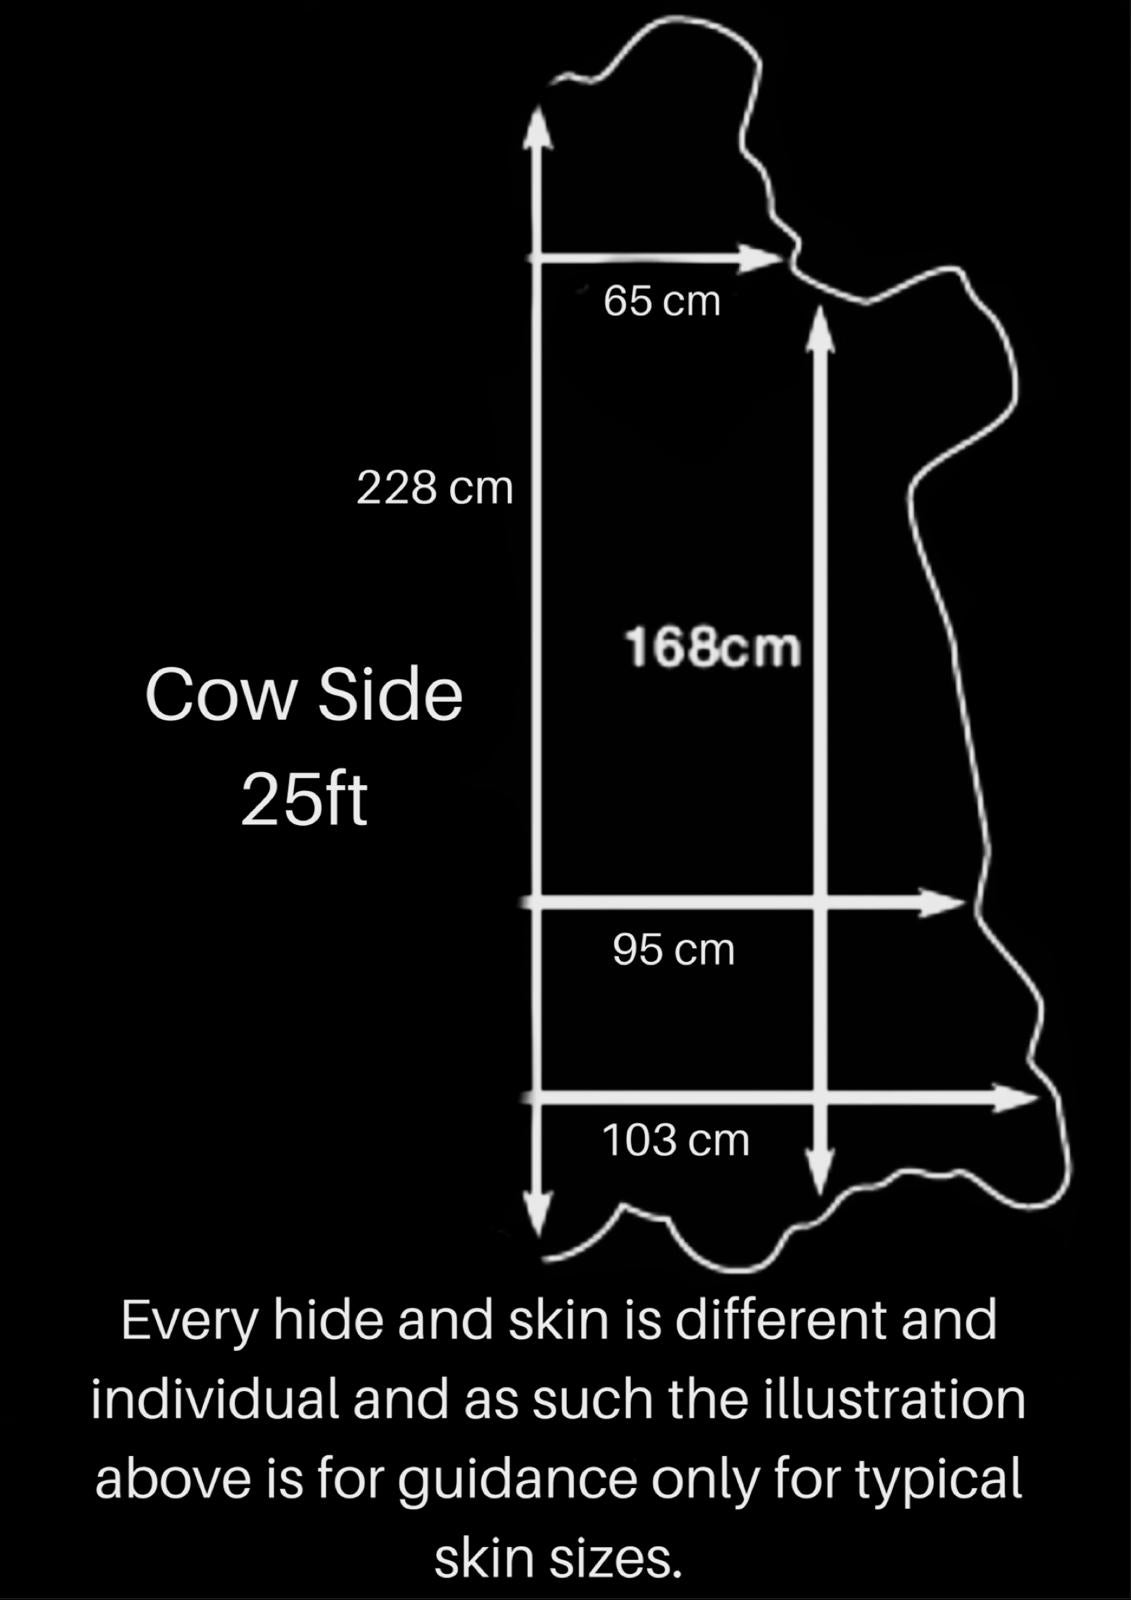 Biker White, Print Assisted Leather Cow Side: (1.2-1.4mm 3oz) 29